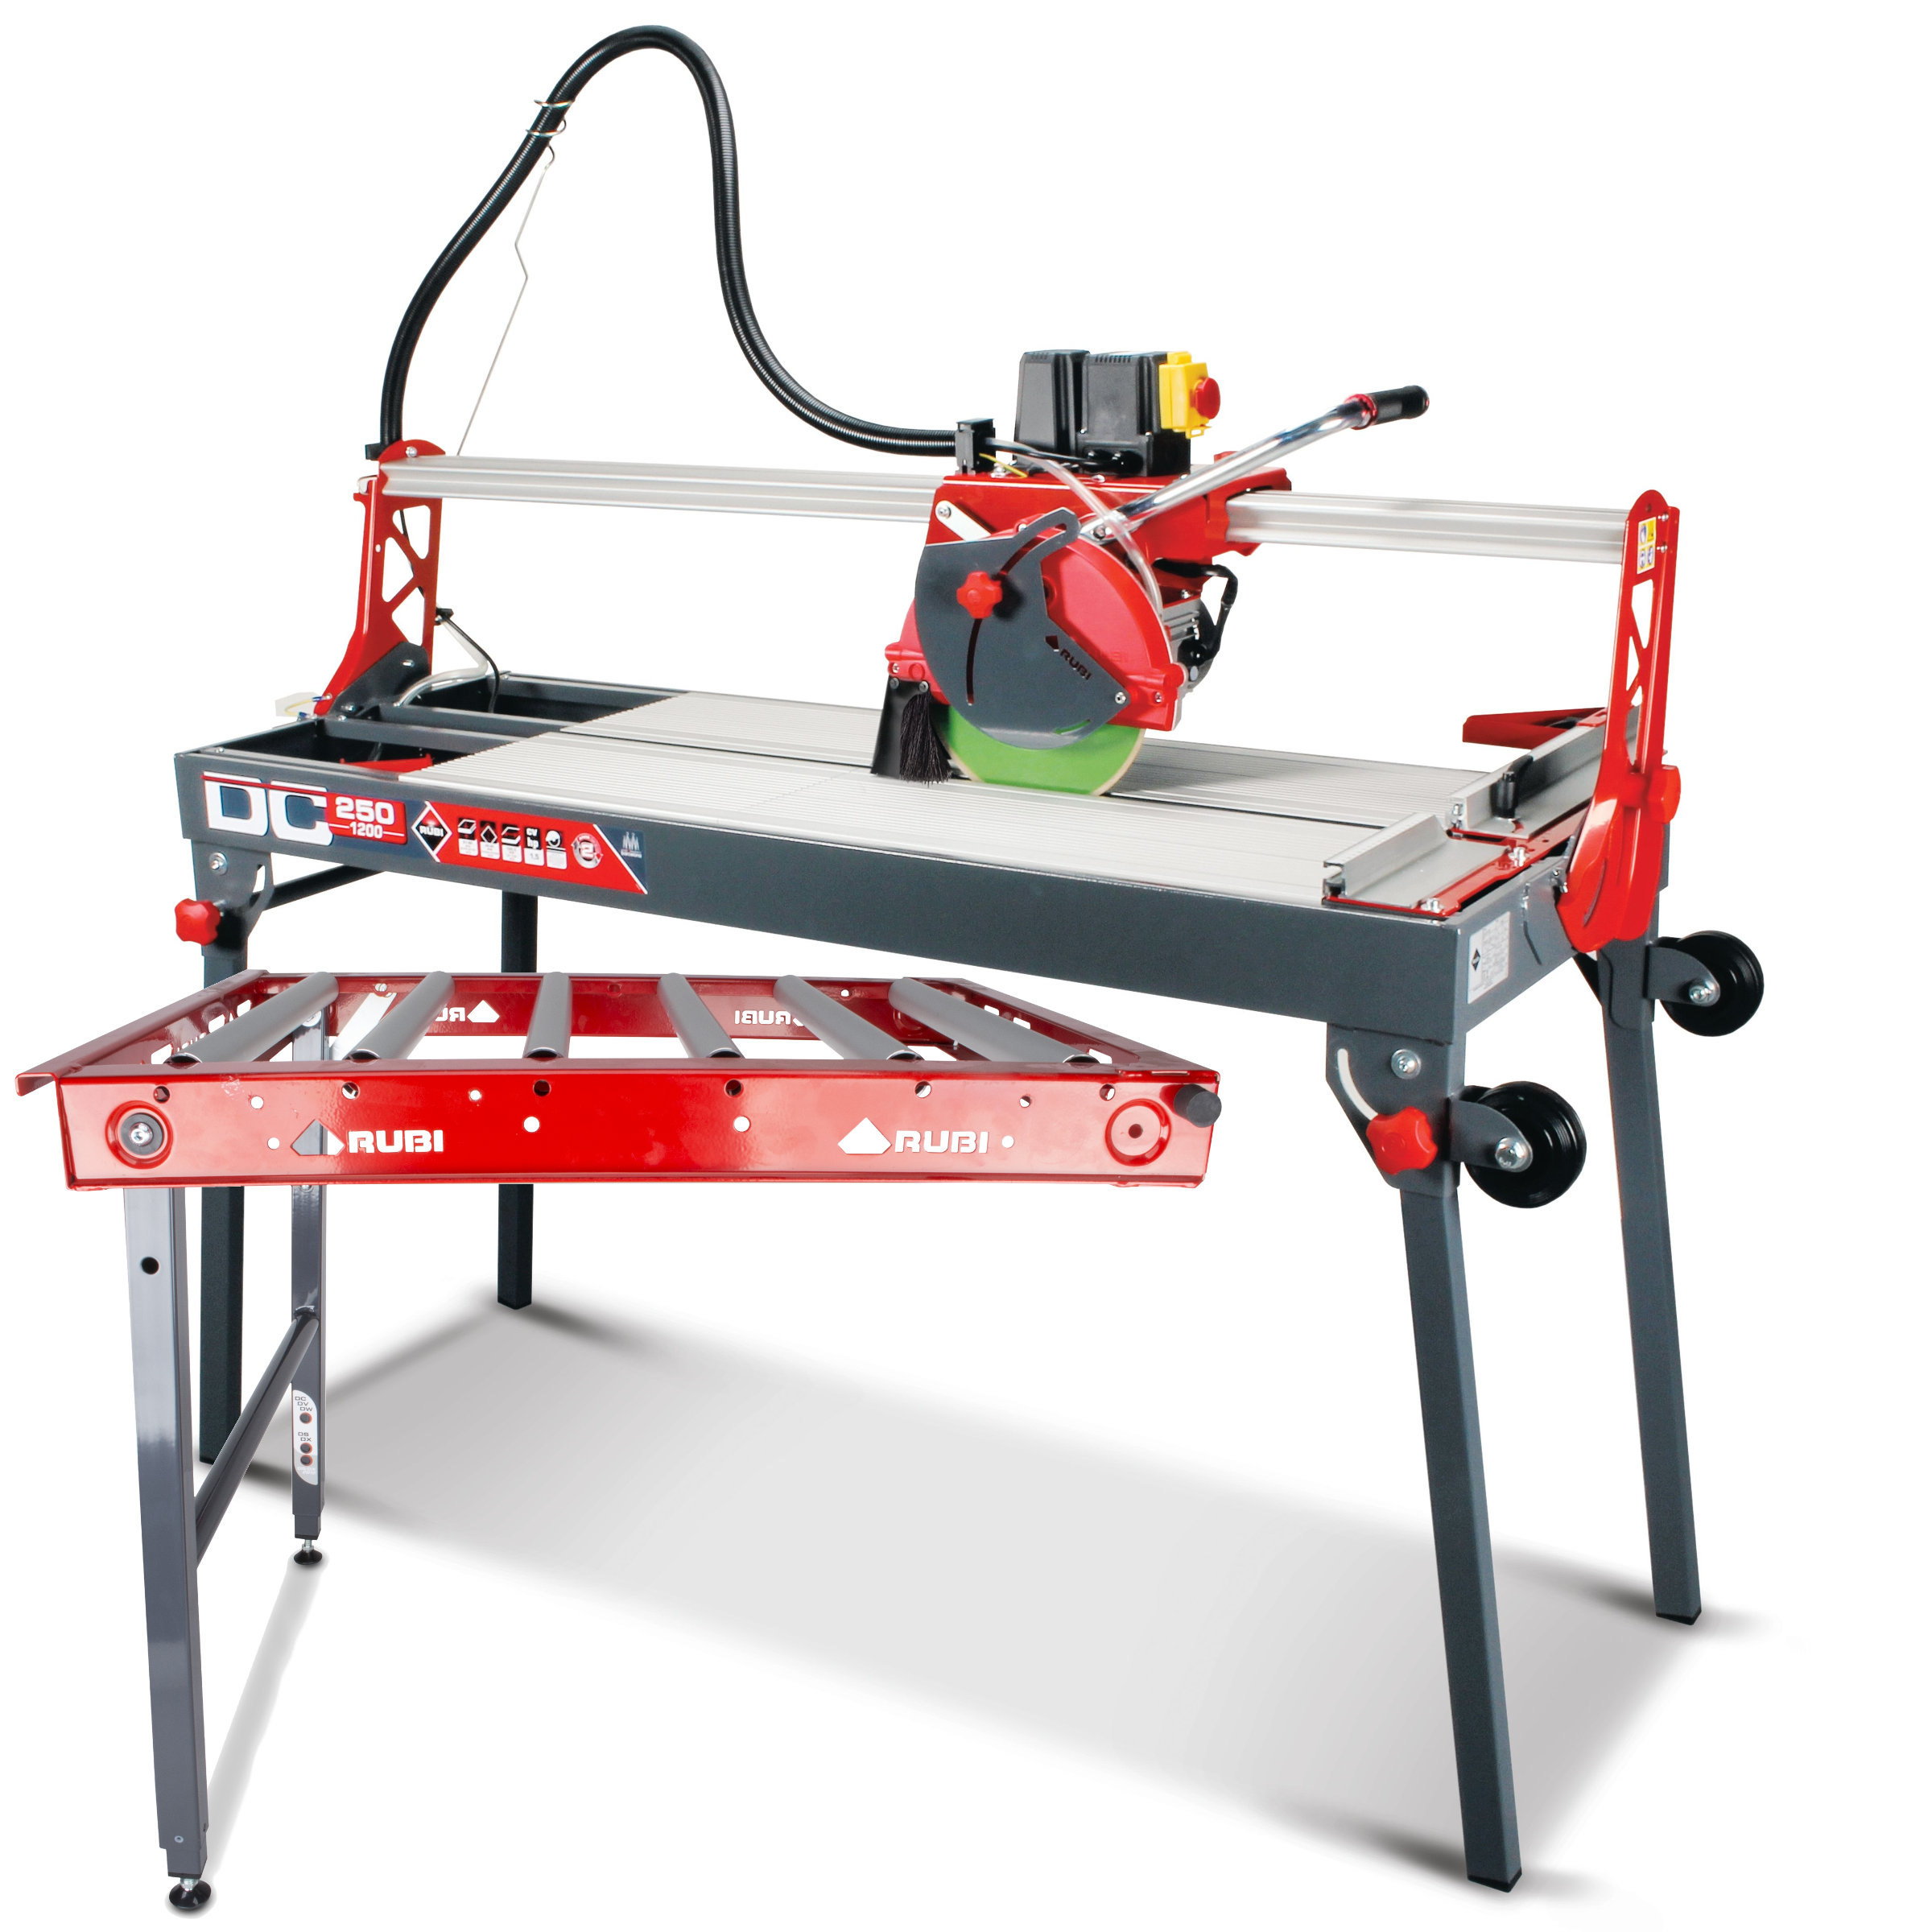 Power Tile Cutters Electric Tile Cutter (Overhead Rail) DC-250 1200 / 110v • Wellers Hire